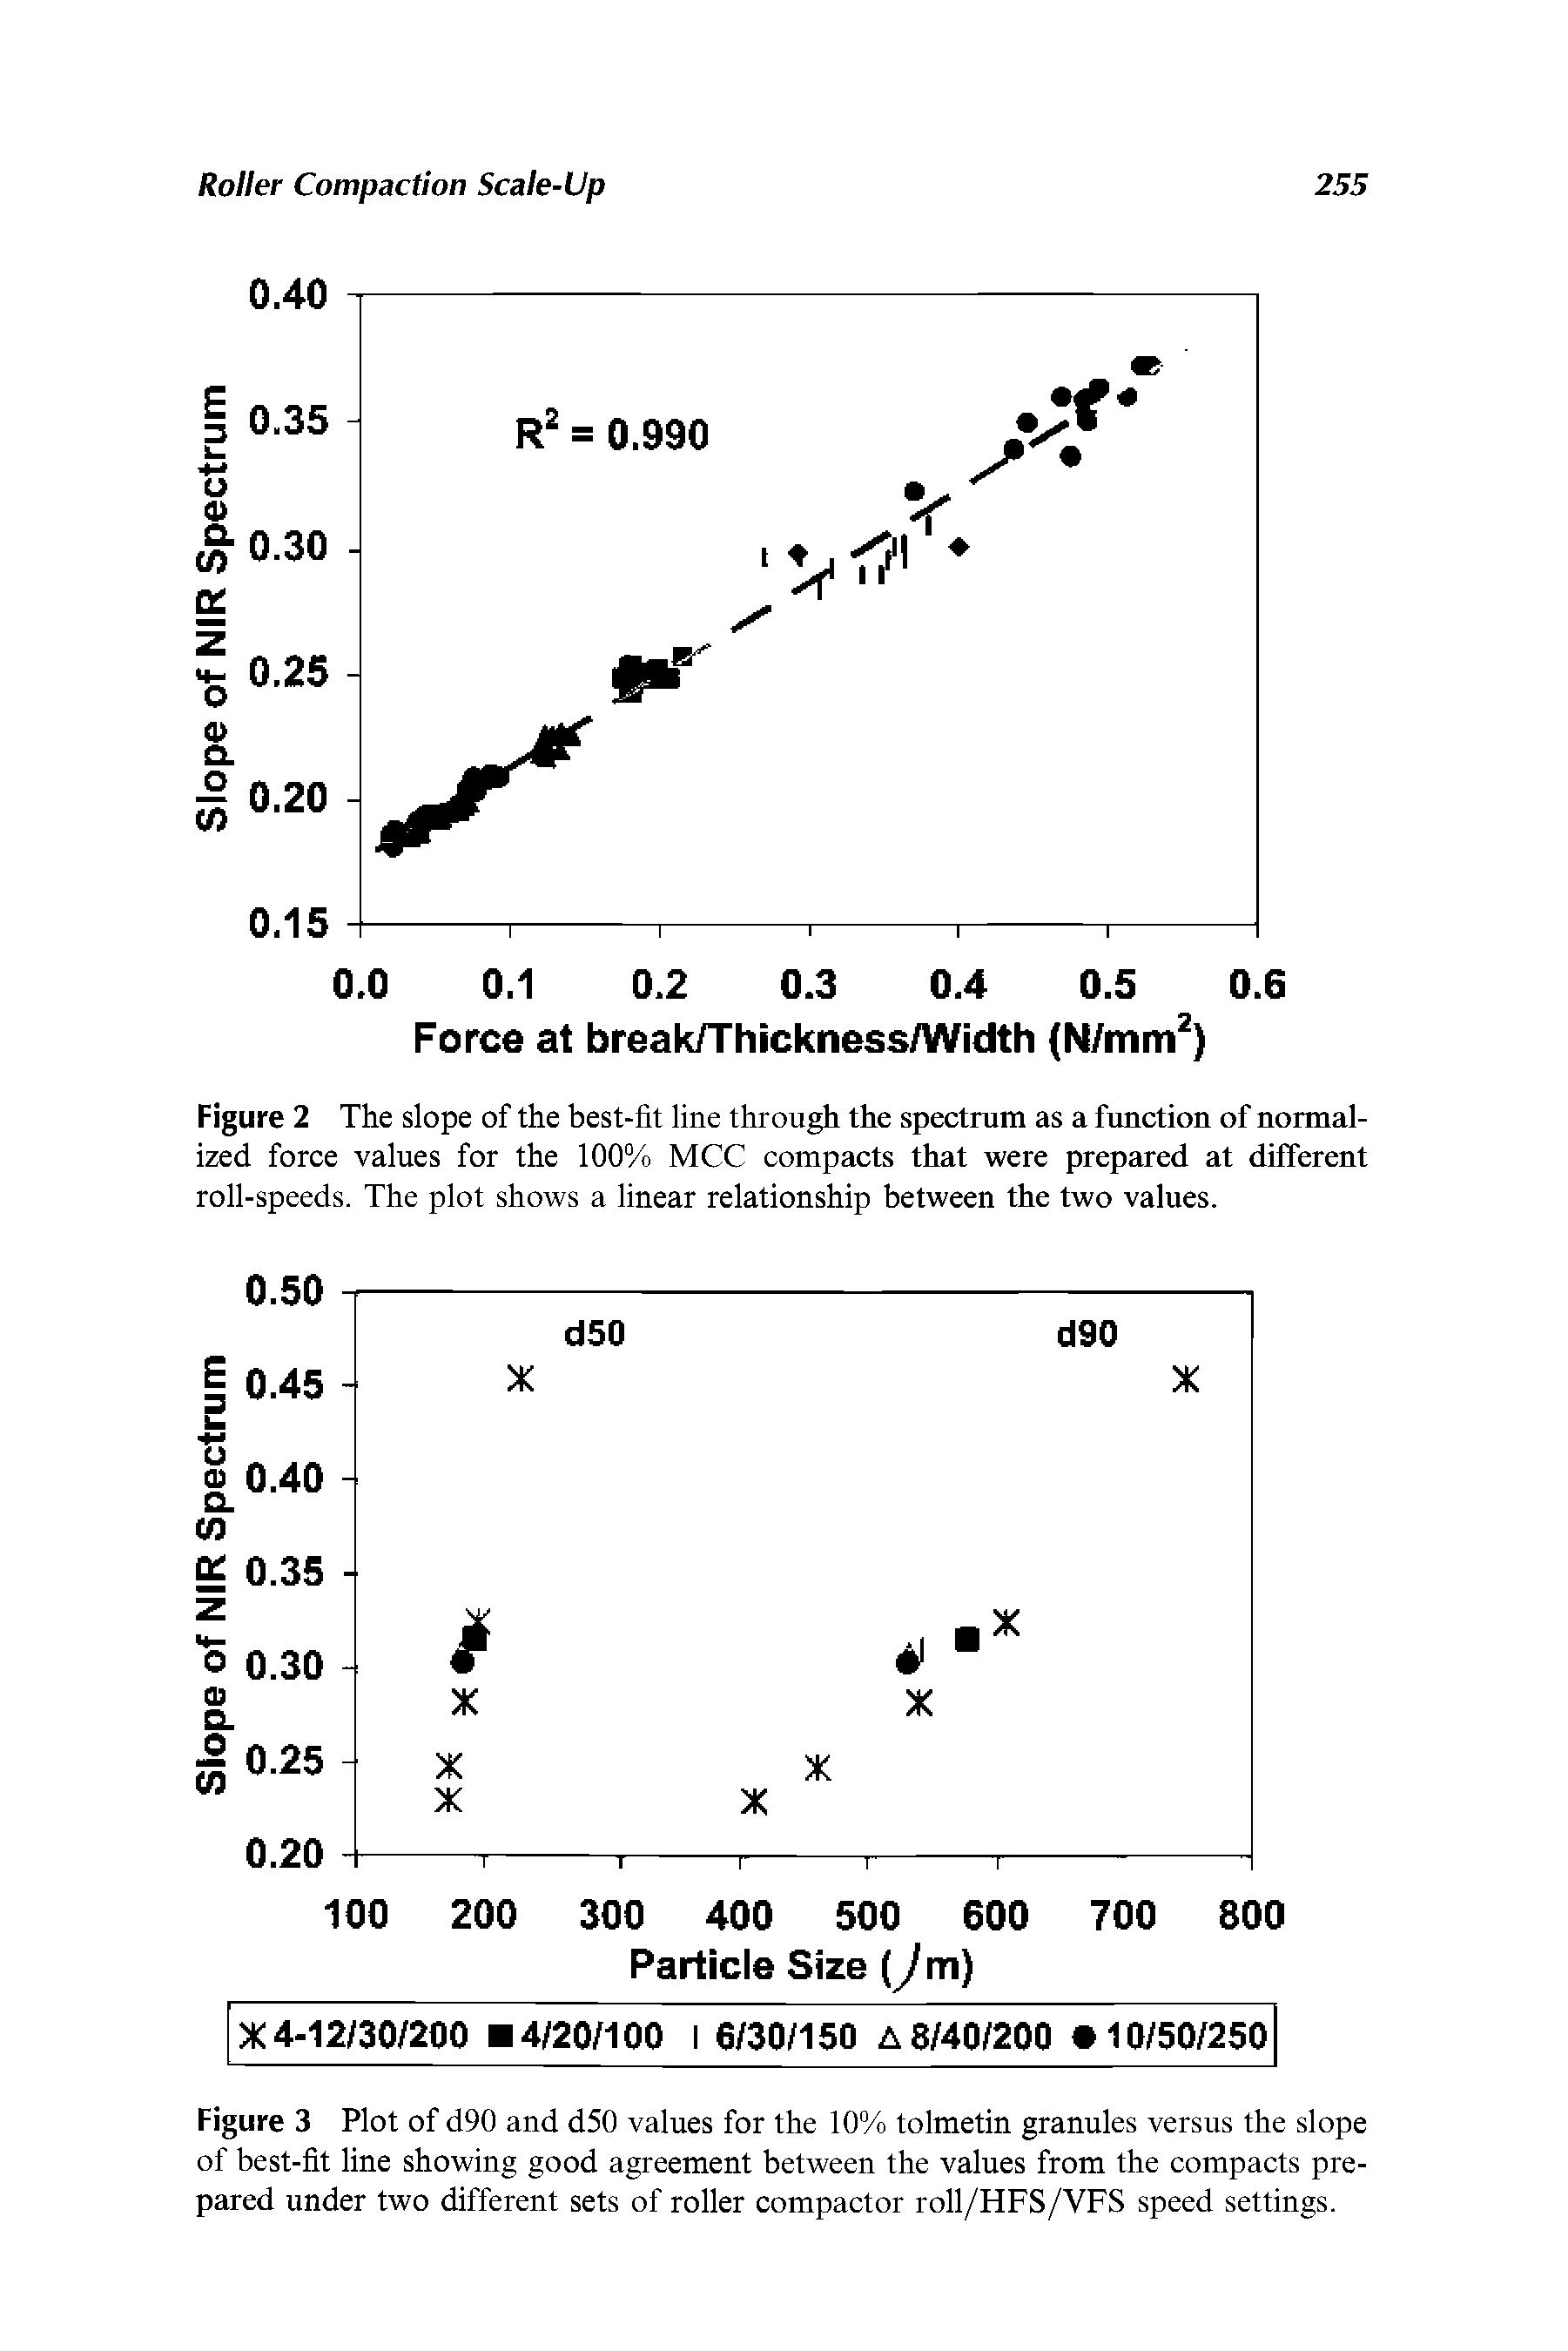 Figure 3 Plot of d90 and d50 values for the 10% tolmetin granules versus the slope of best-fit line showing good agreement between the values from the compacts prepared under two different sets of roller compactor roll/HFS/VFS speed settings.